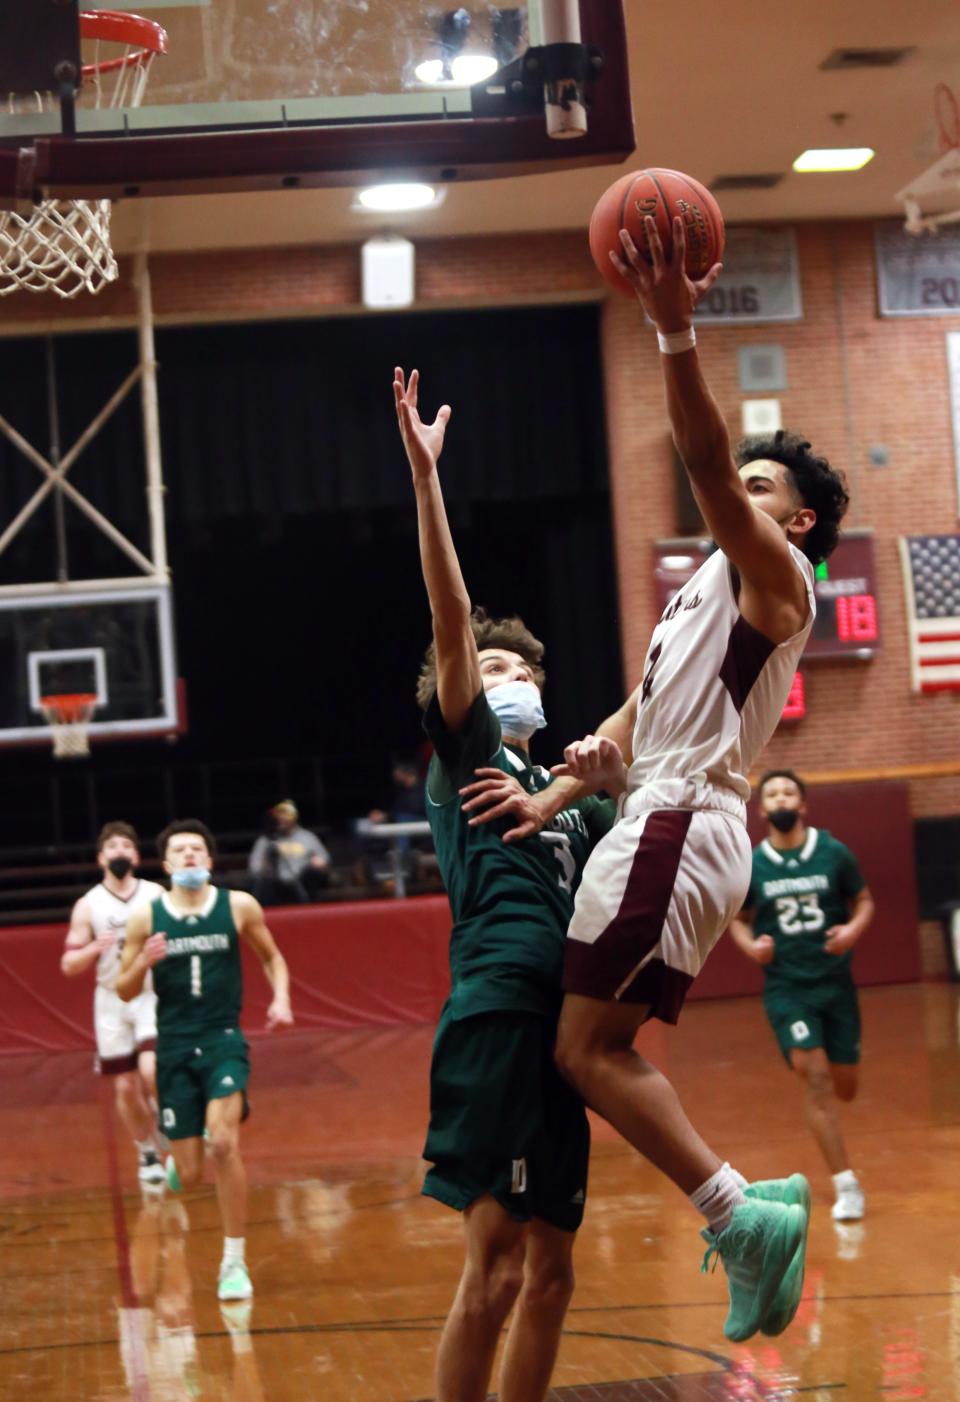 Luis Vega Jr. goes over Jake Chiquito to finish the fast break Friday in Bishop Stang's 63-49 win over Dartmouth at the John C. O'Brien Gymnasium.